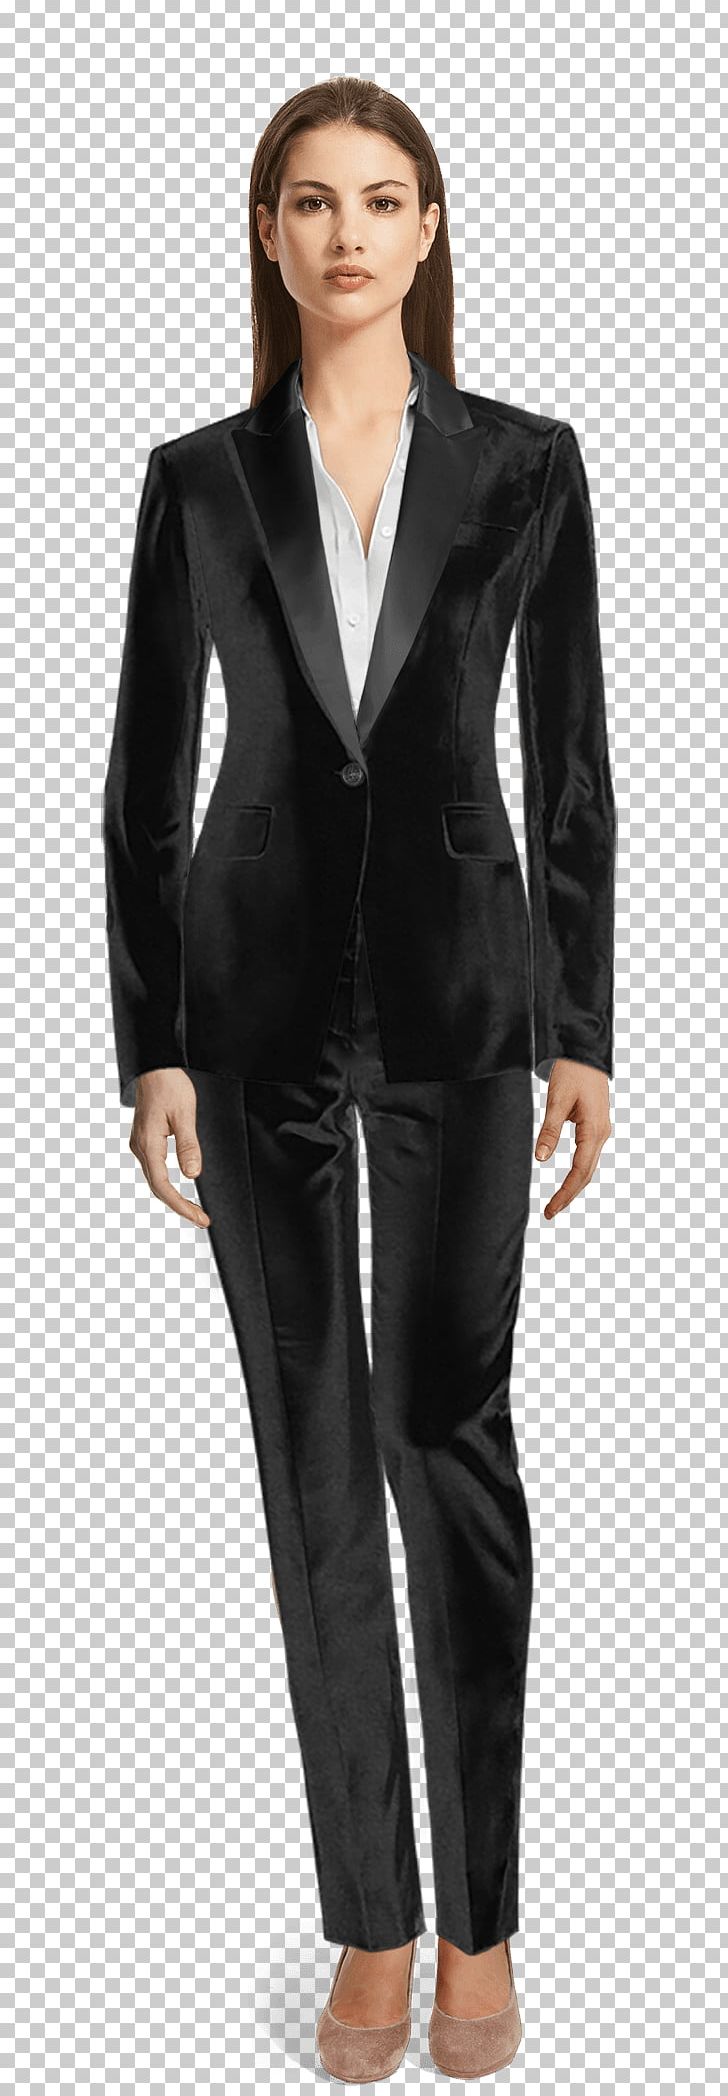 Suit Lapel Tuxedo Blazer Clothing PNG, Clipart, Blazer, Button, Clothing, Doublebreasted, Formal Wear Free PNG Download